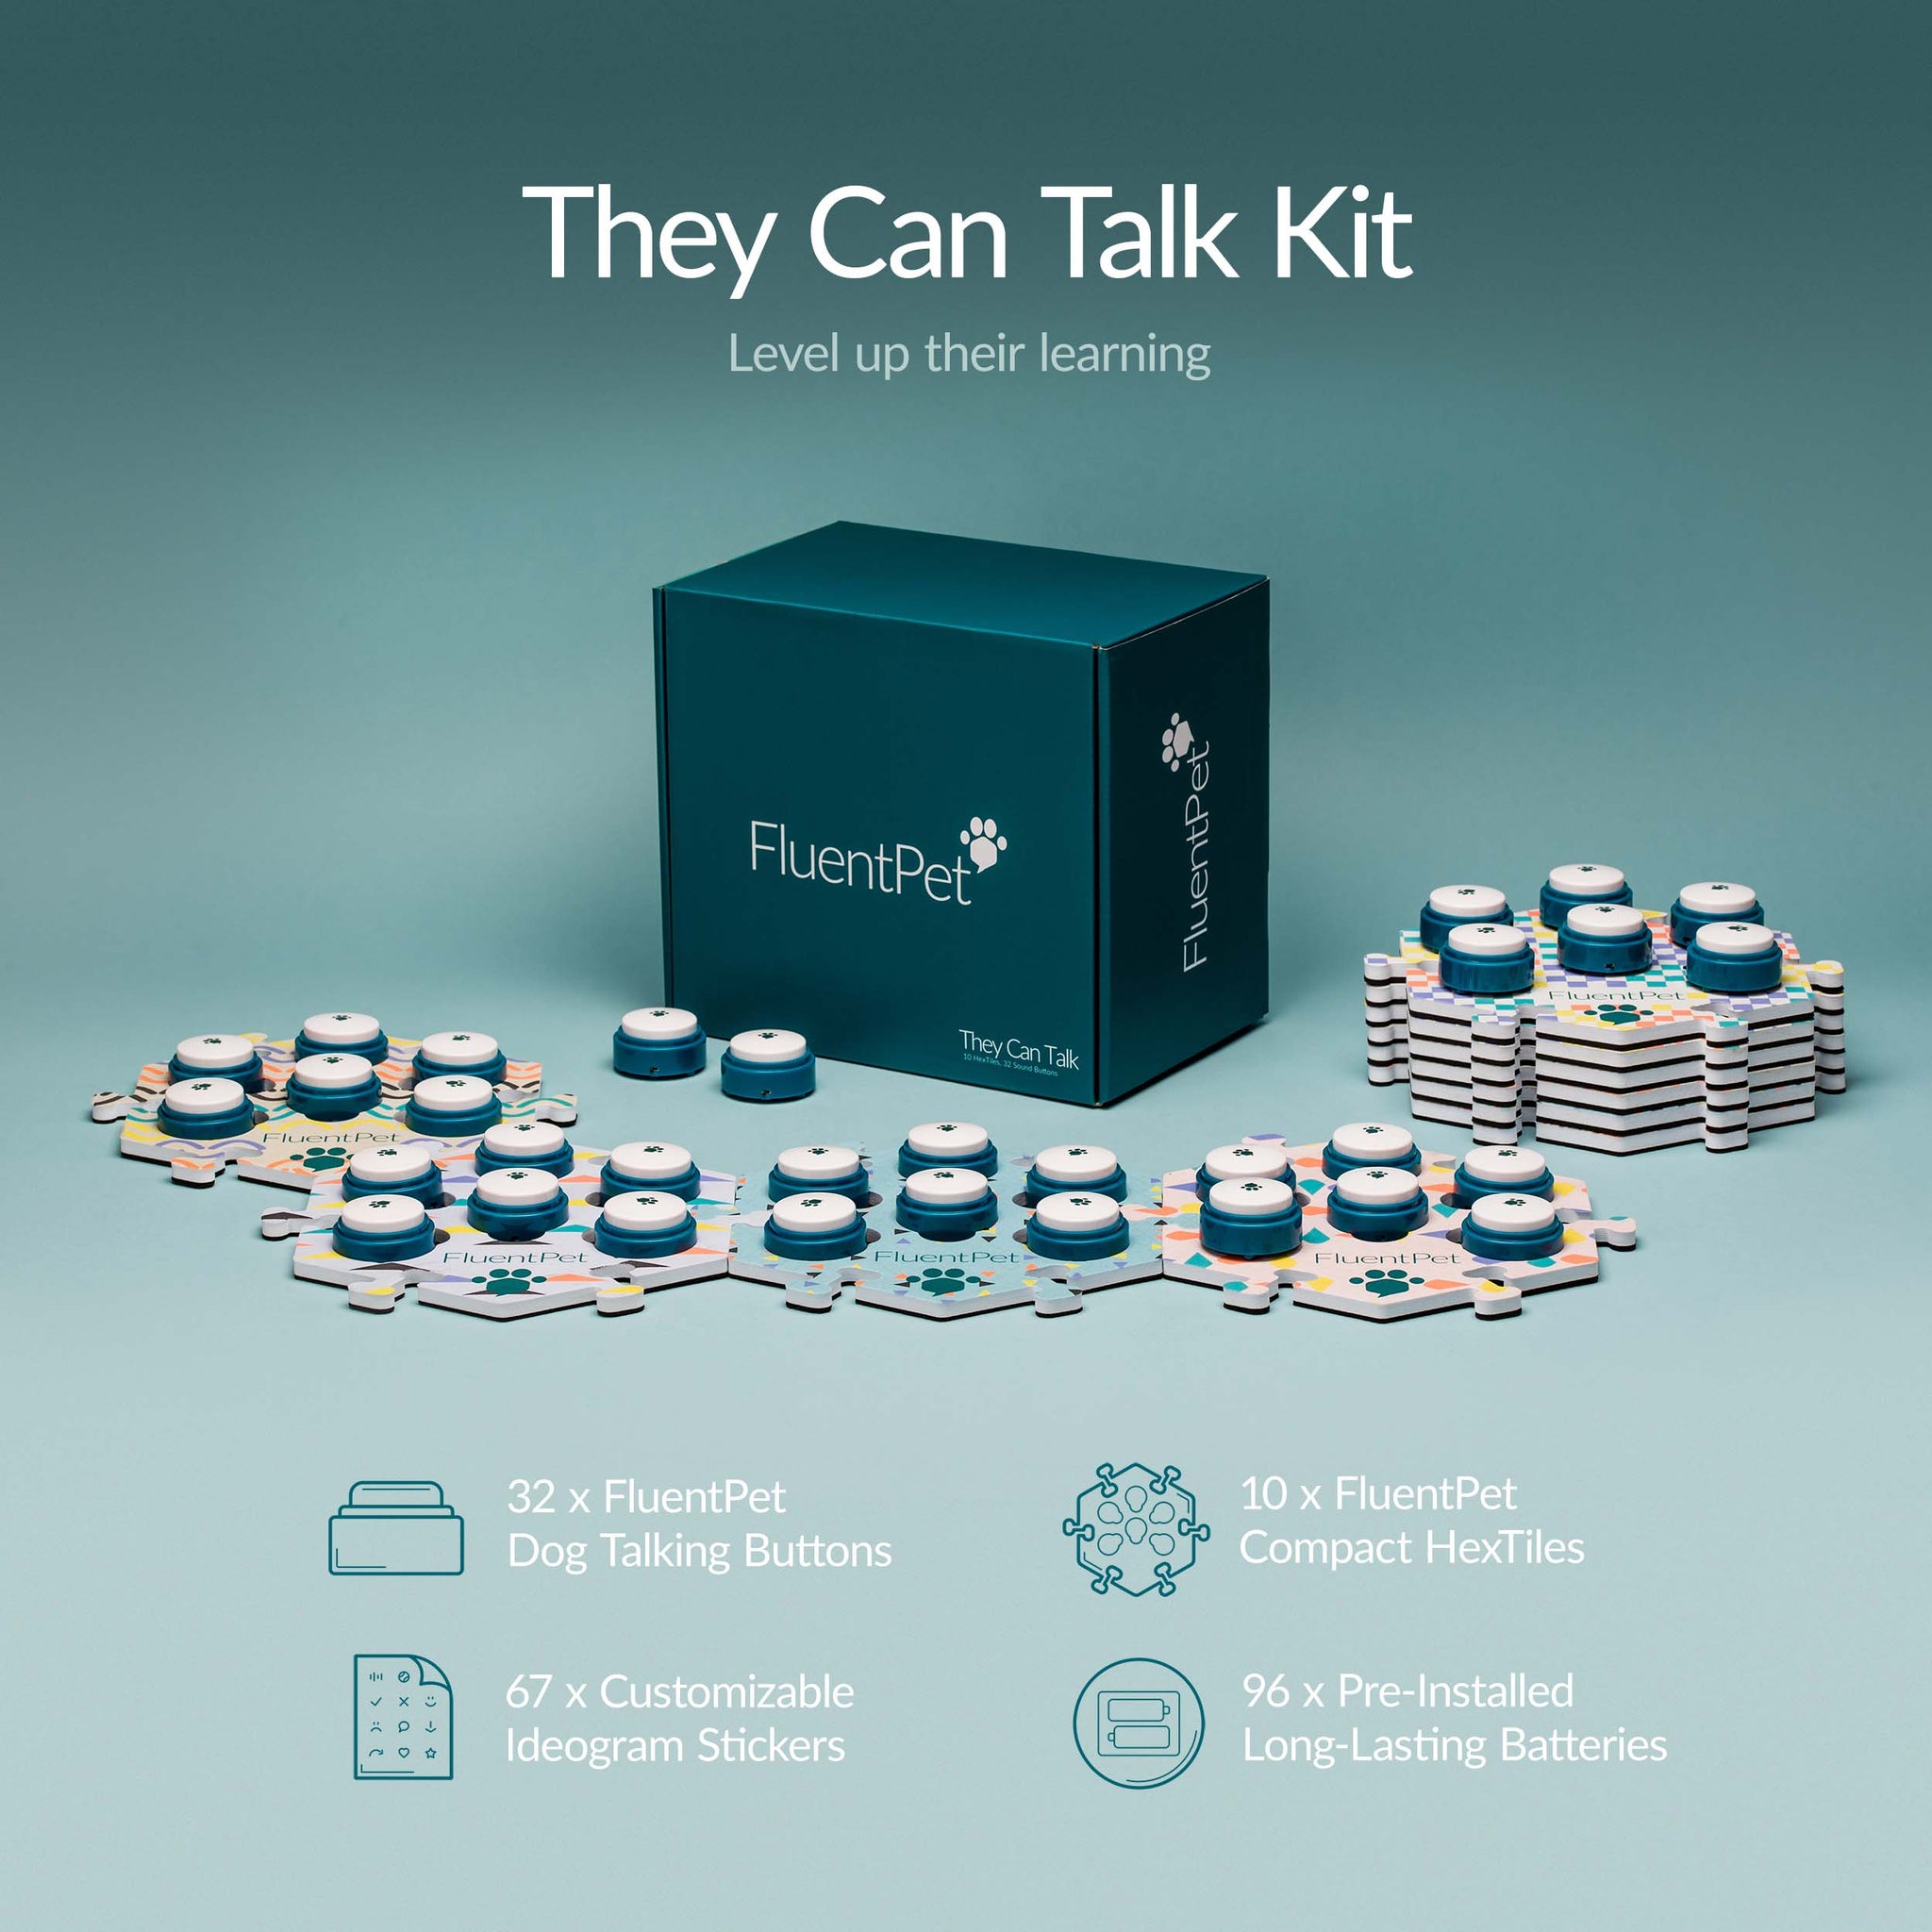 They Can Talk FluentPet Dog Talking Buttons Kit - What's in The Box